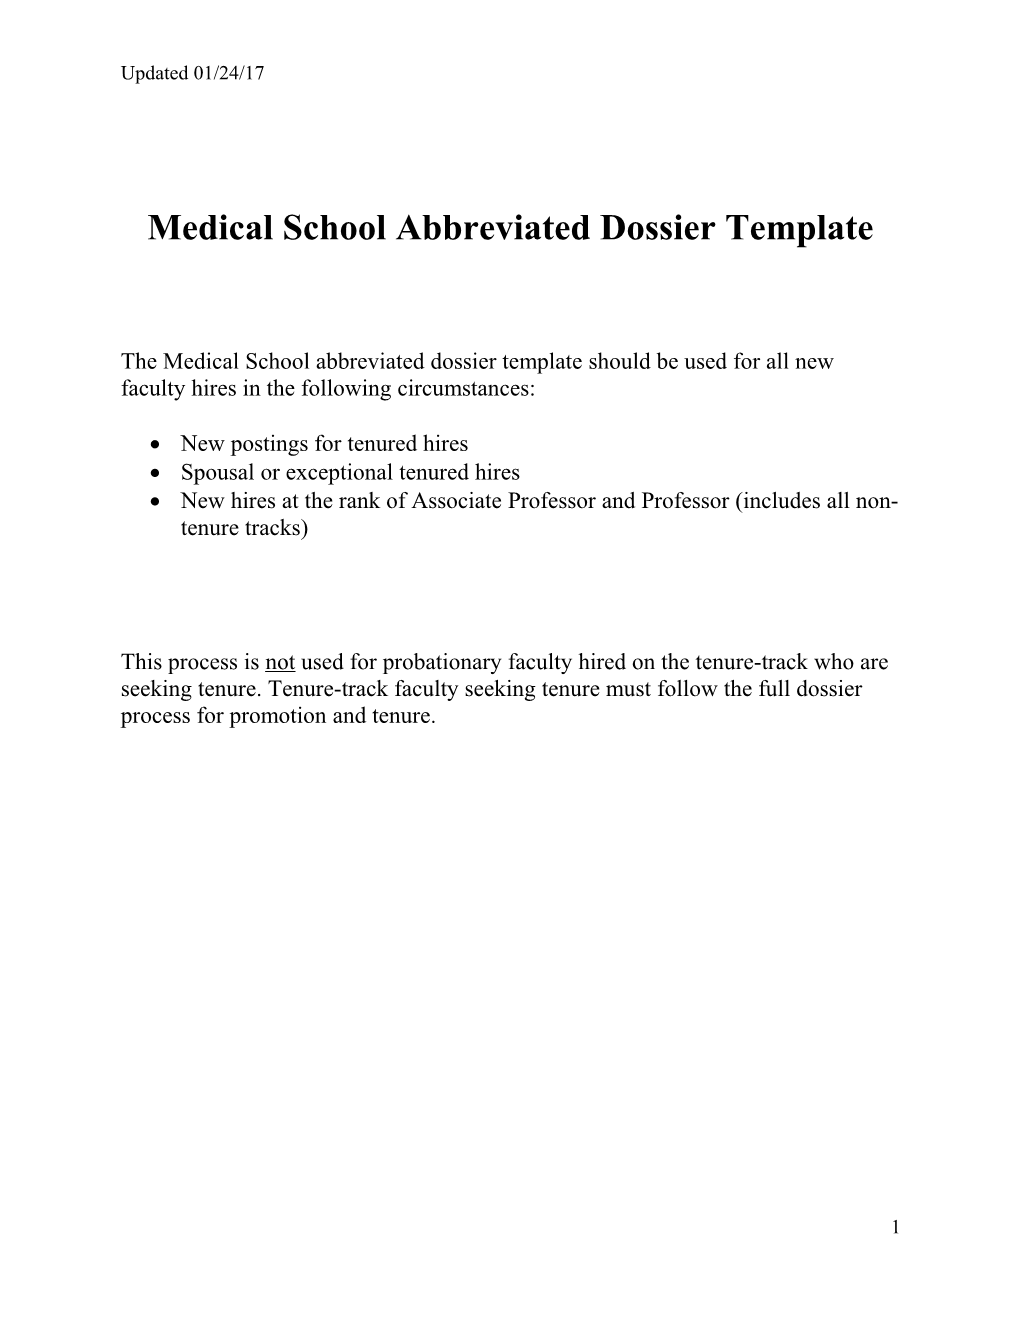 Abbreviated Dossier for Tenured Hires s1